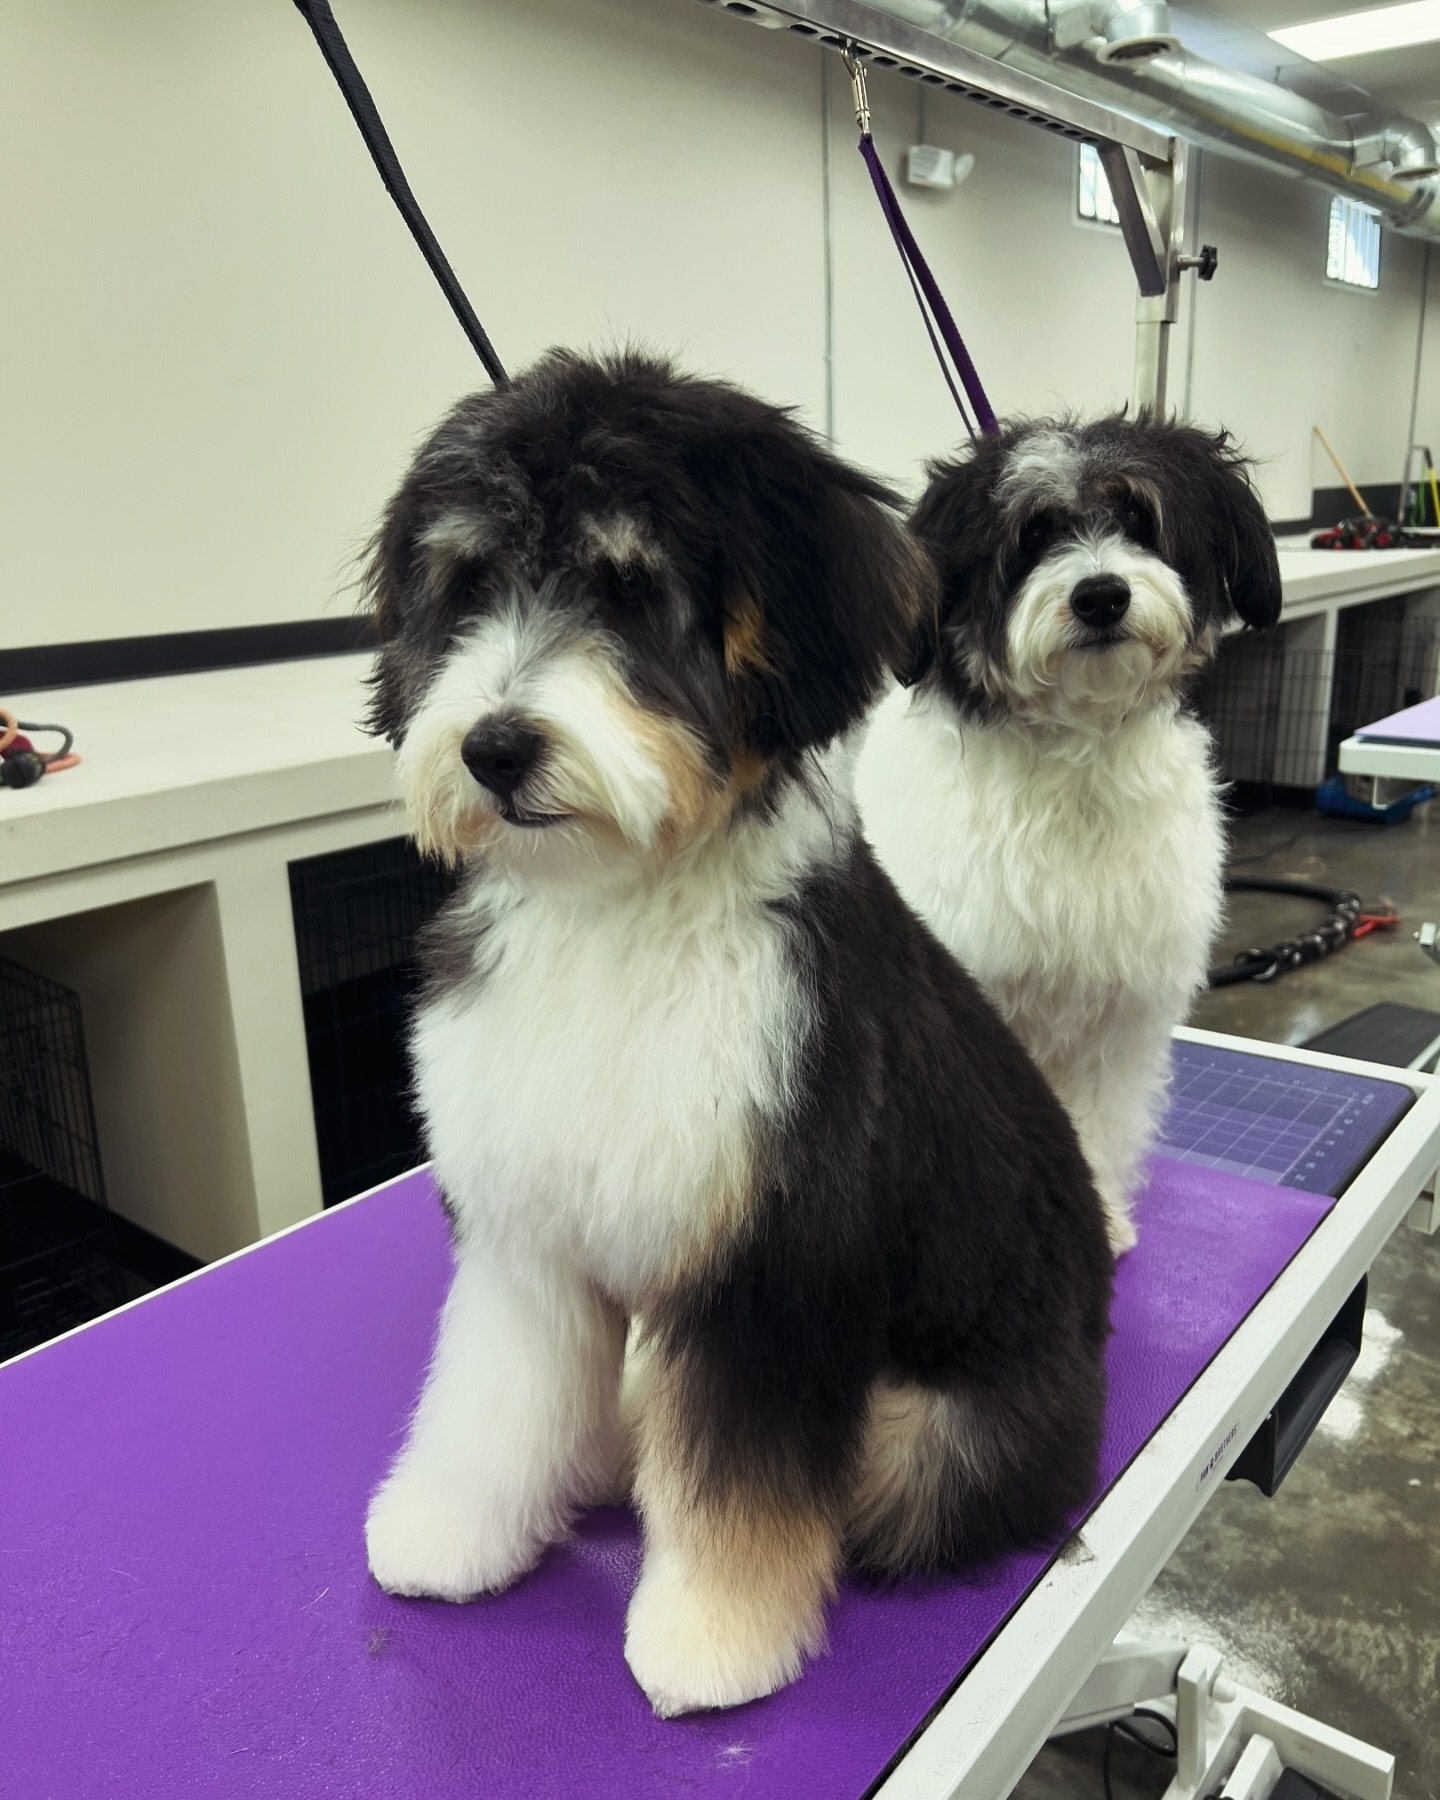 I love these two 😍 they are also very close so luckily a big table and two smaller dogs means they can get groomed together. 

#dogfriendlyclt #704 #clt #swissdoodle #siblings #siblinglove #bonded #doggrooming #doodle #doodlesofcharlotte #summertime